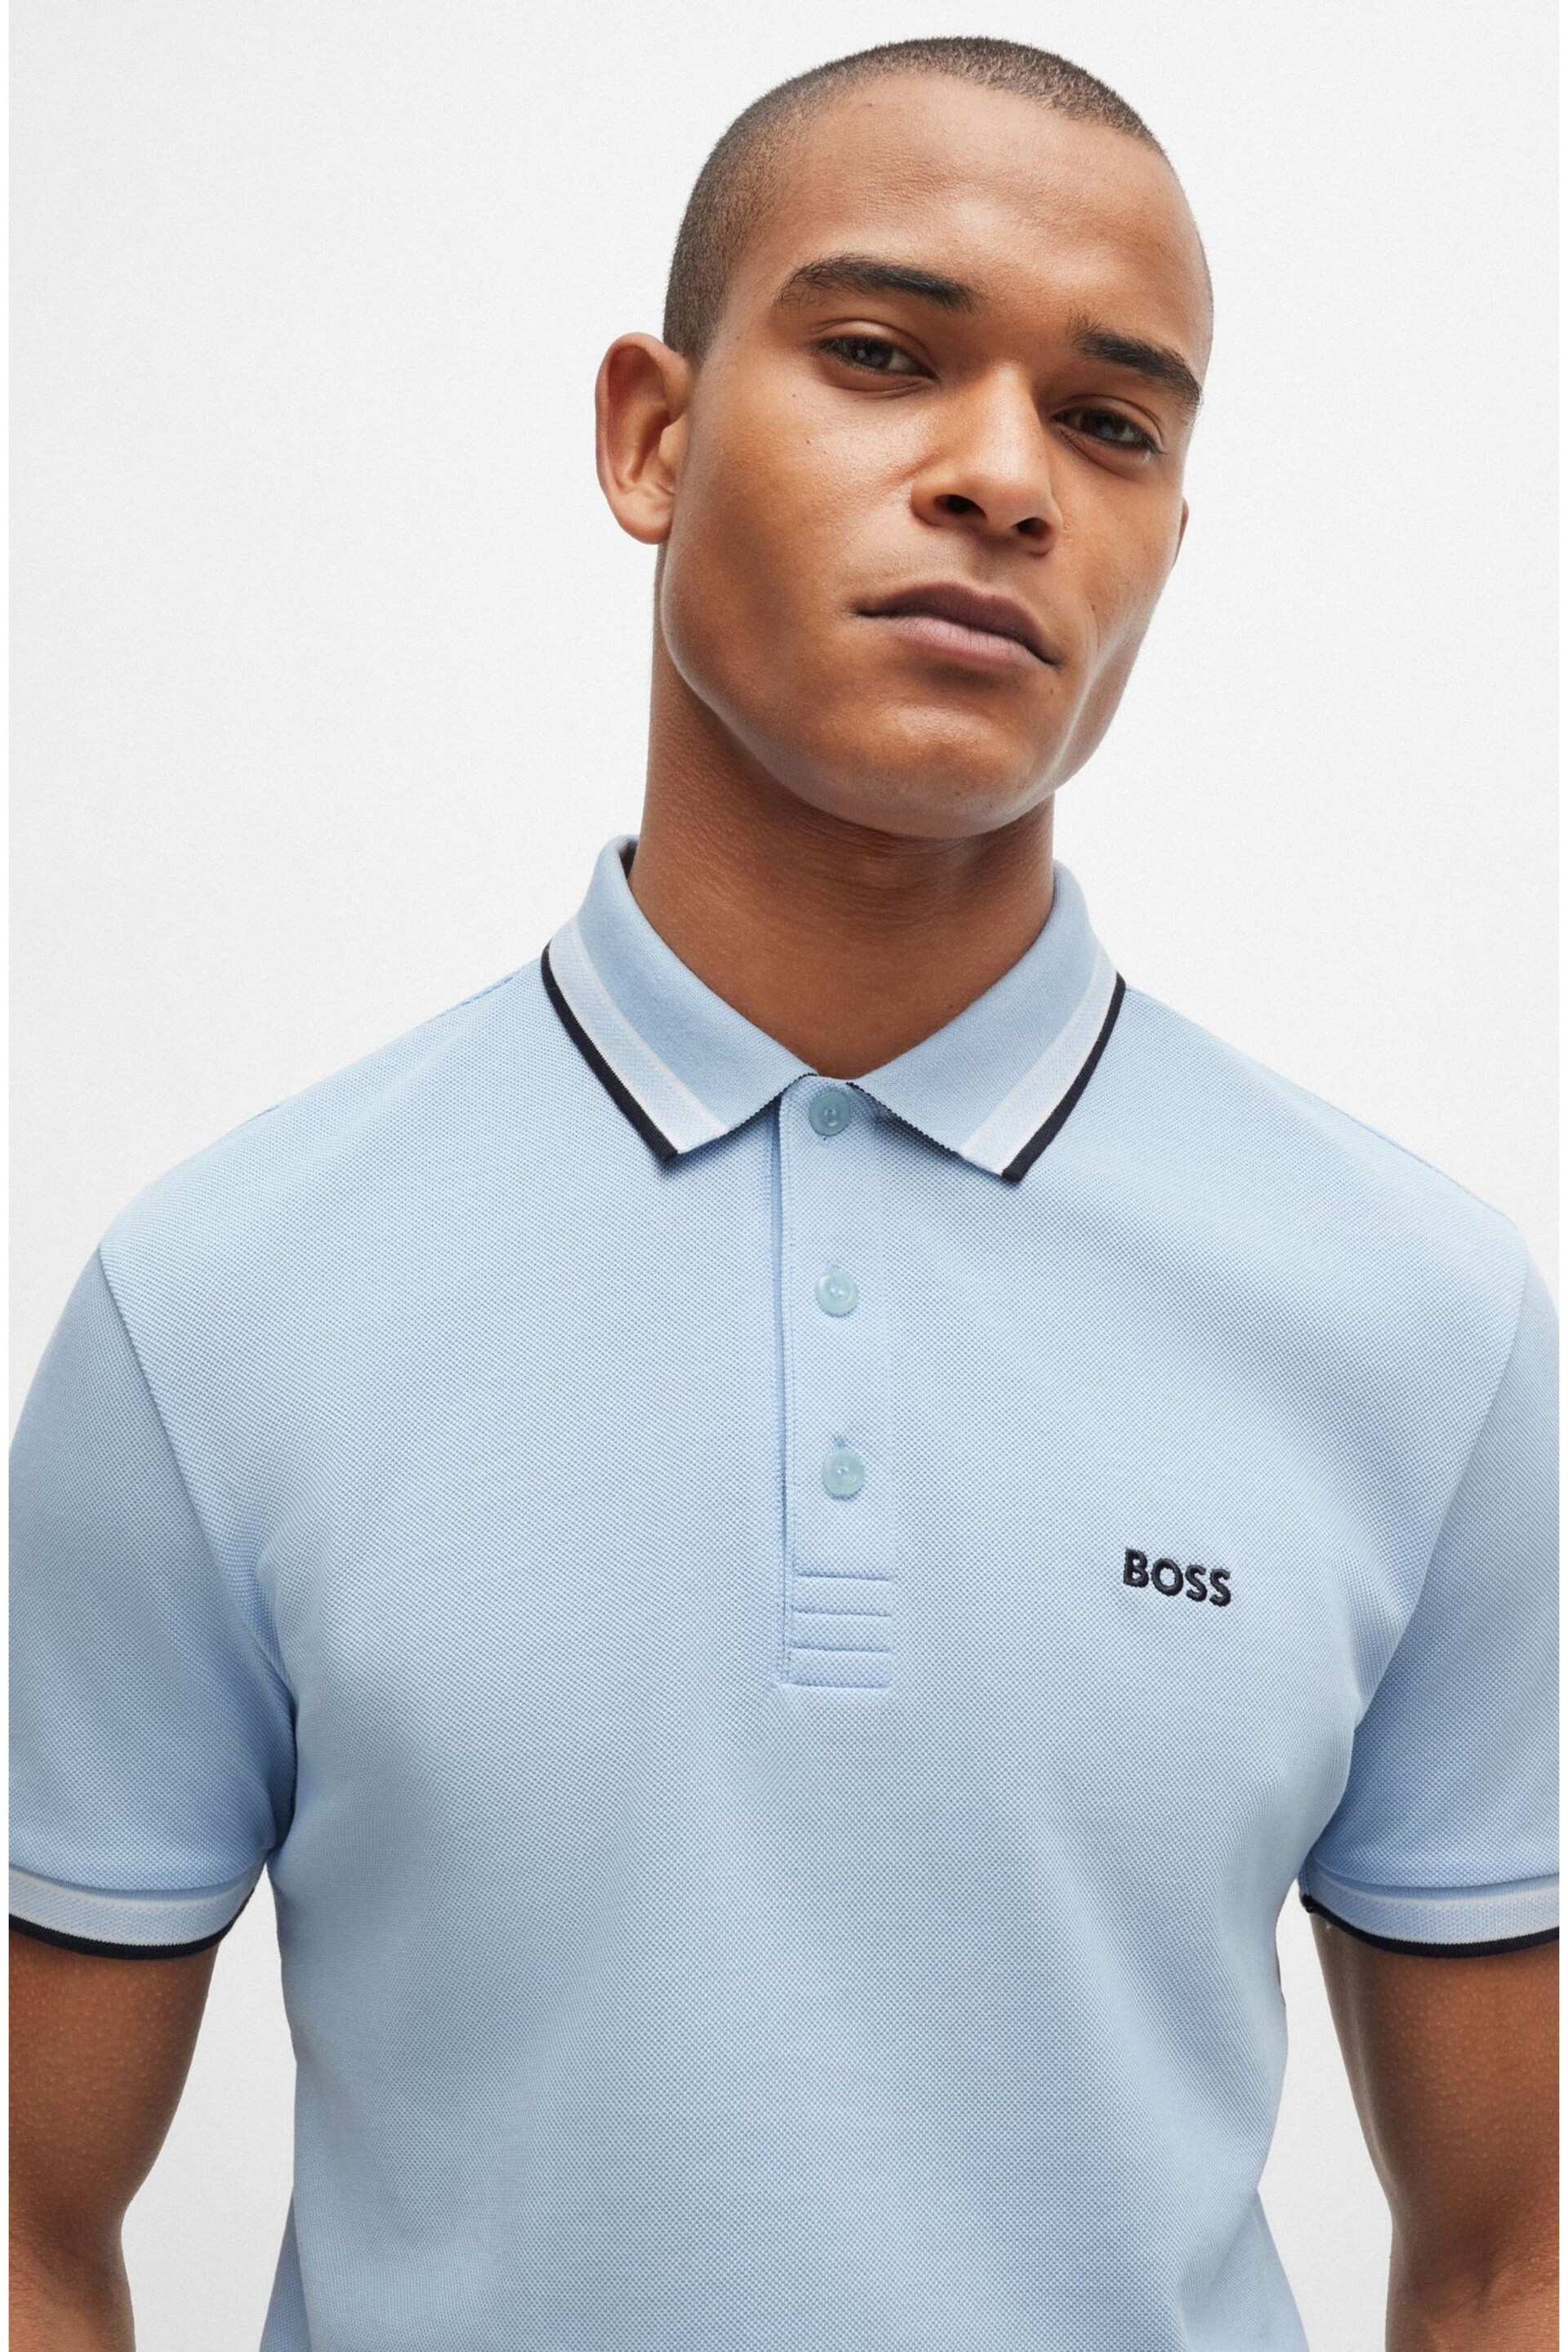 BOSS Light Blue/Black Tipping Paddy Polo Pink Cream Shirt - Image 7 of 8